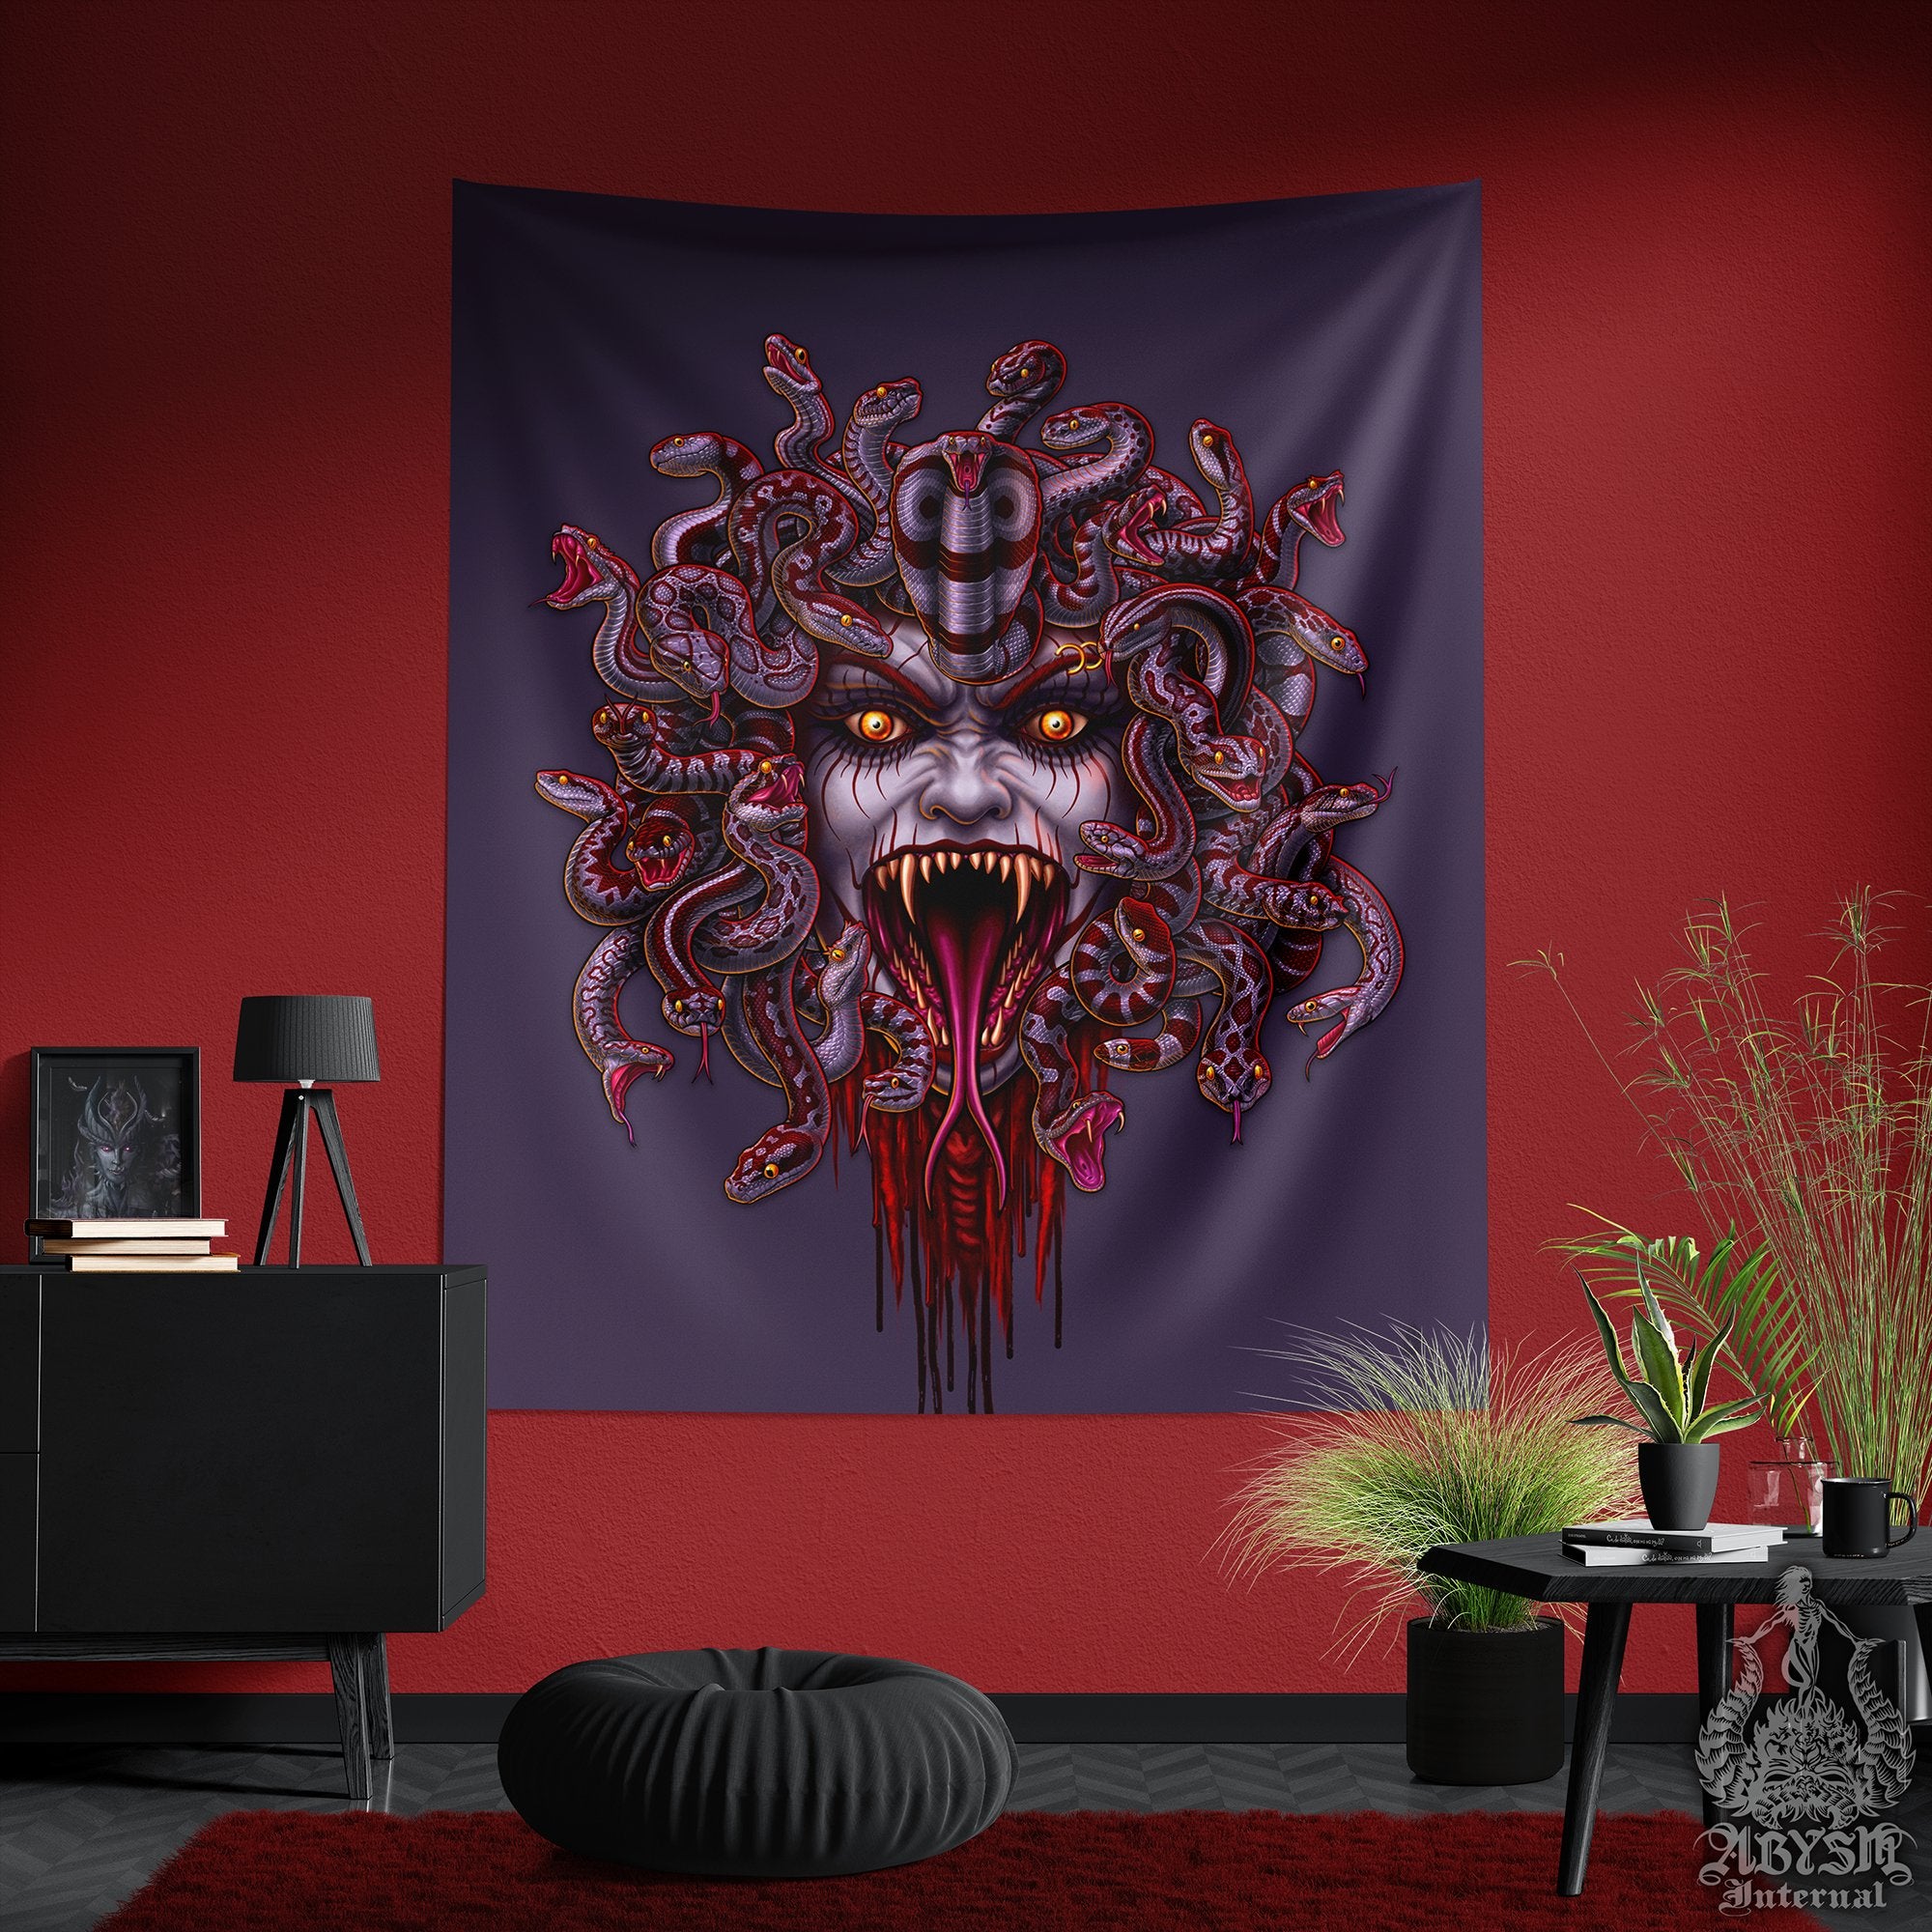 Medusa Tapestry, Goth Wall Hanging, Fantasy Home Decor, Vertical Art Print - Bloody Ash, Grey Snakes, 3 Faces - Abysm Internal